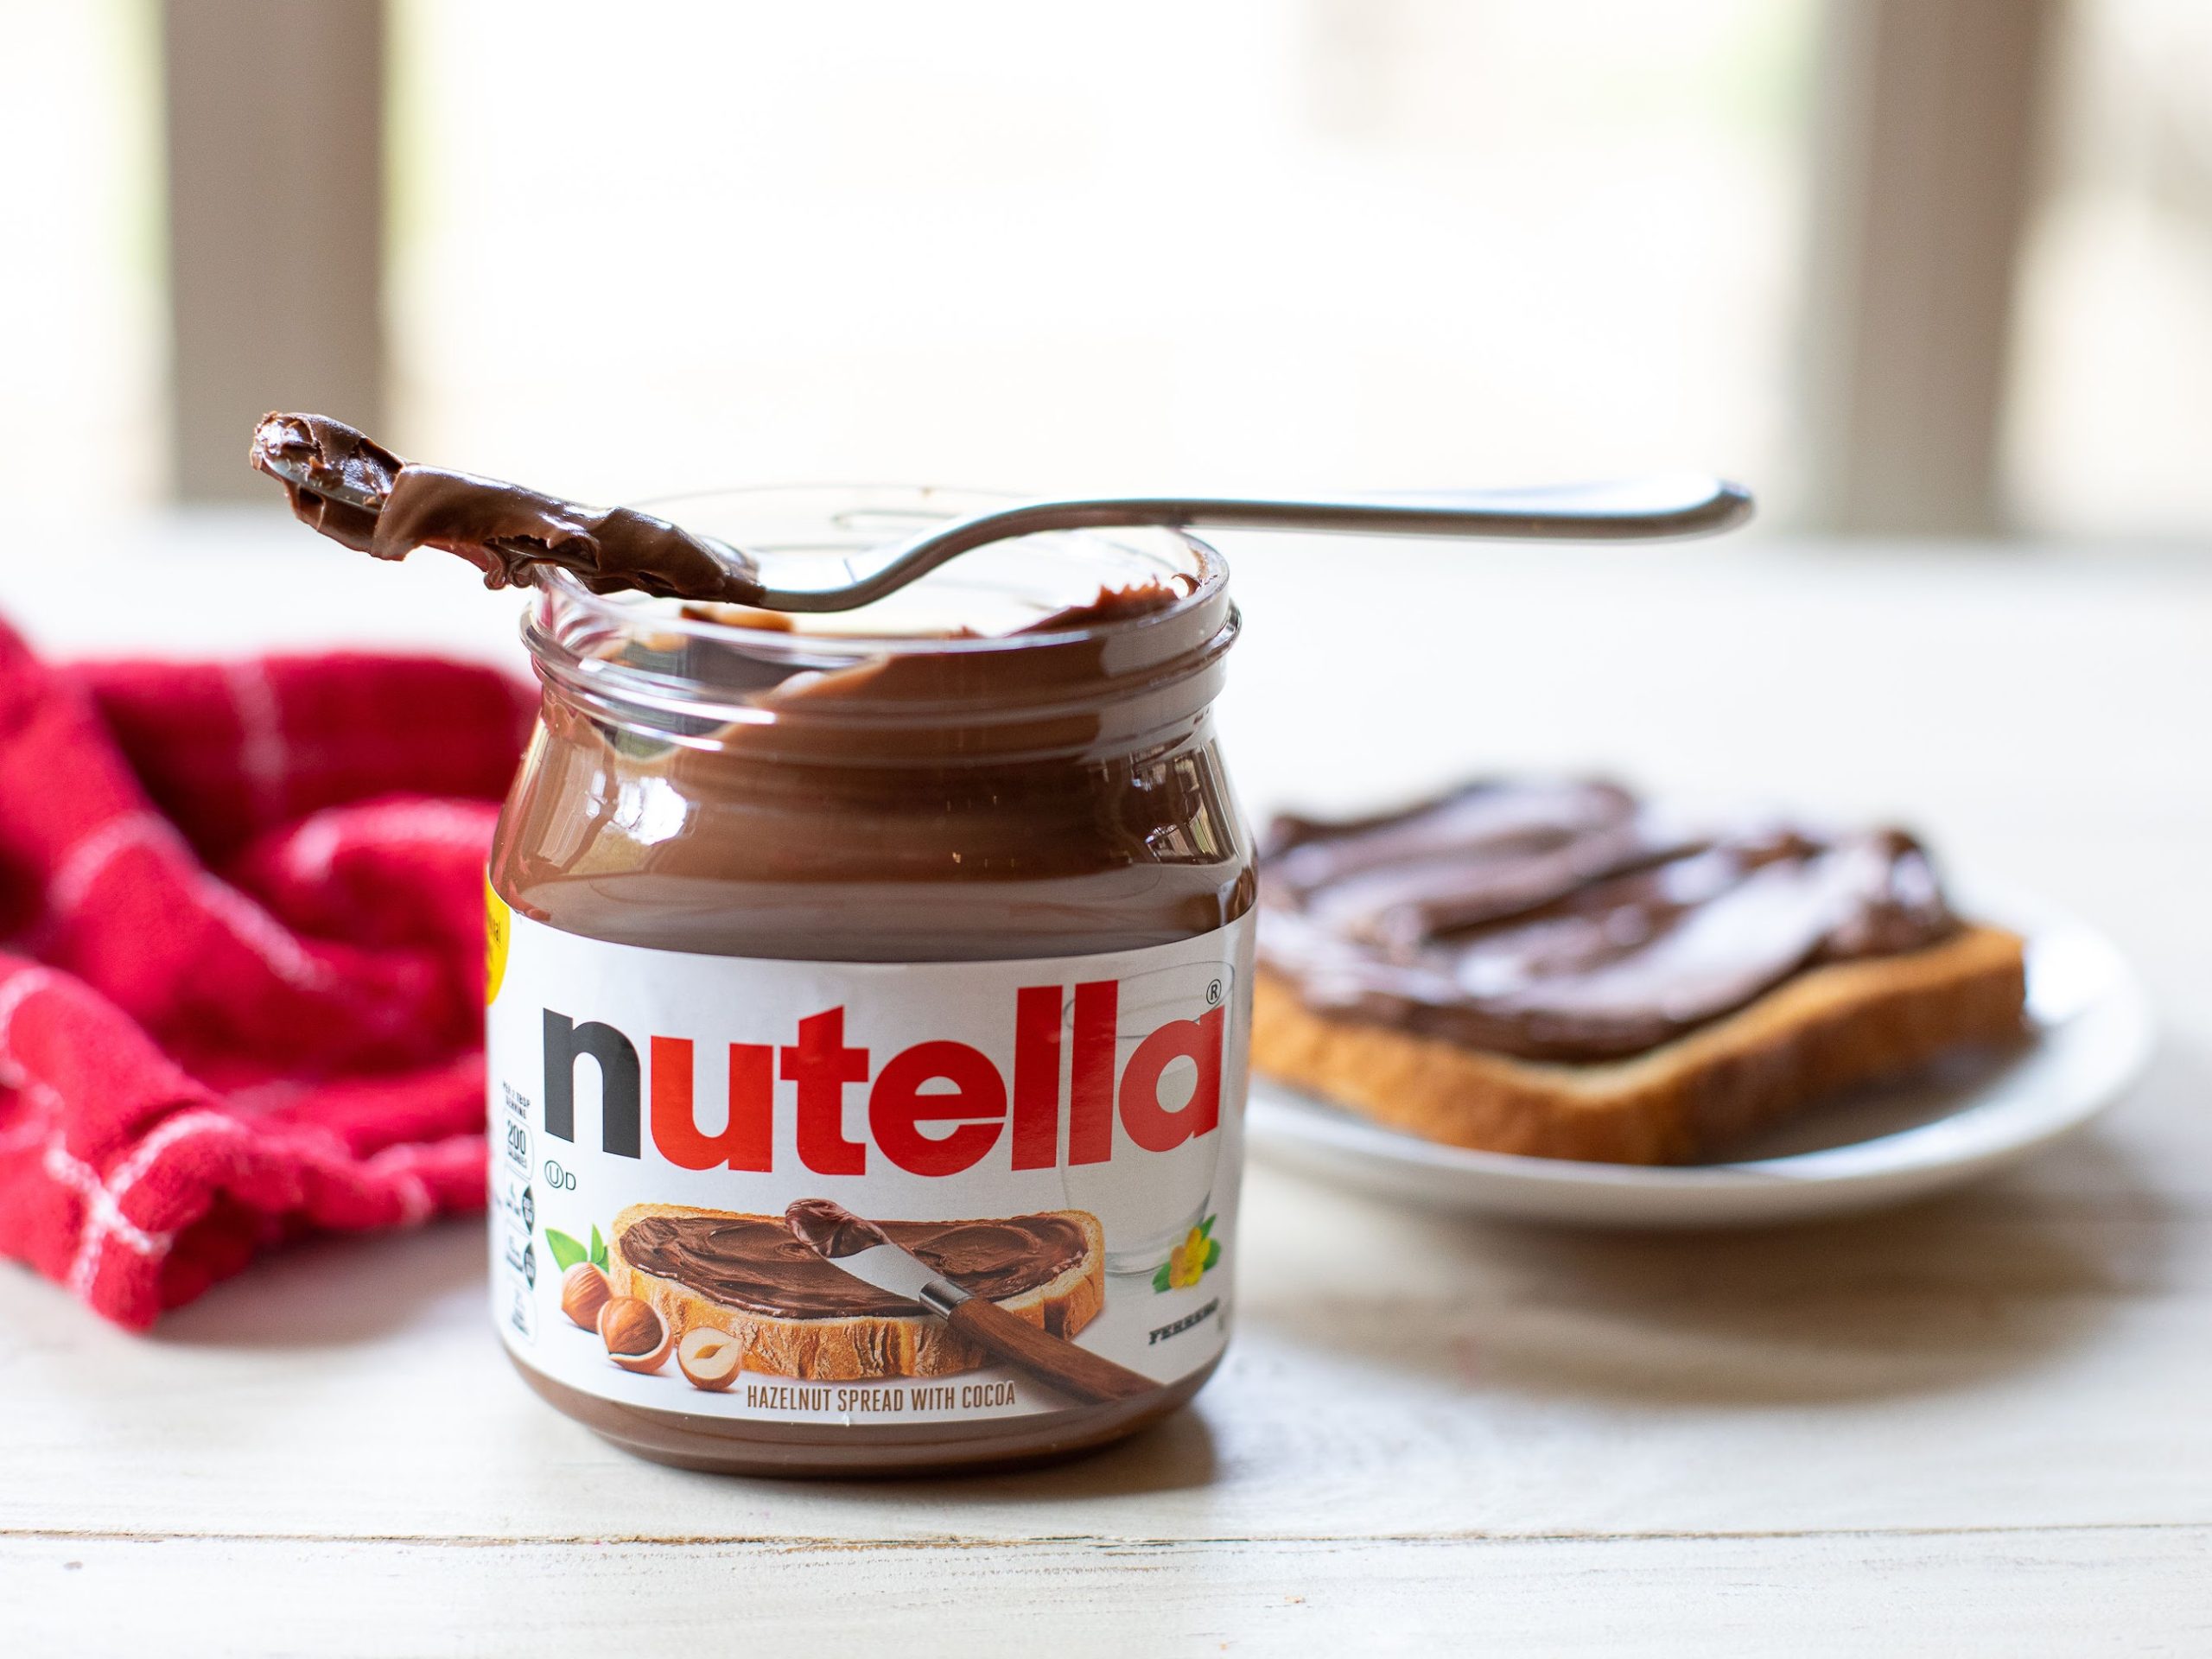 Grab Nutella For Just 65¢ At Publix